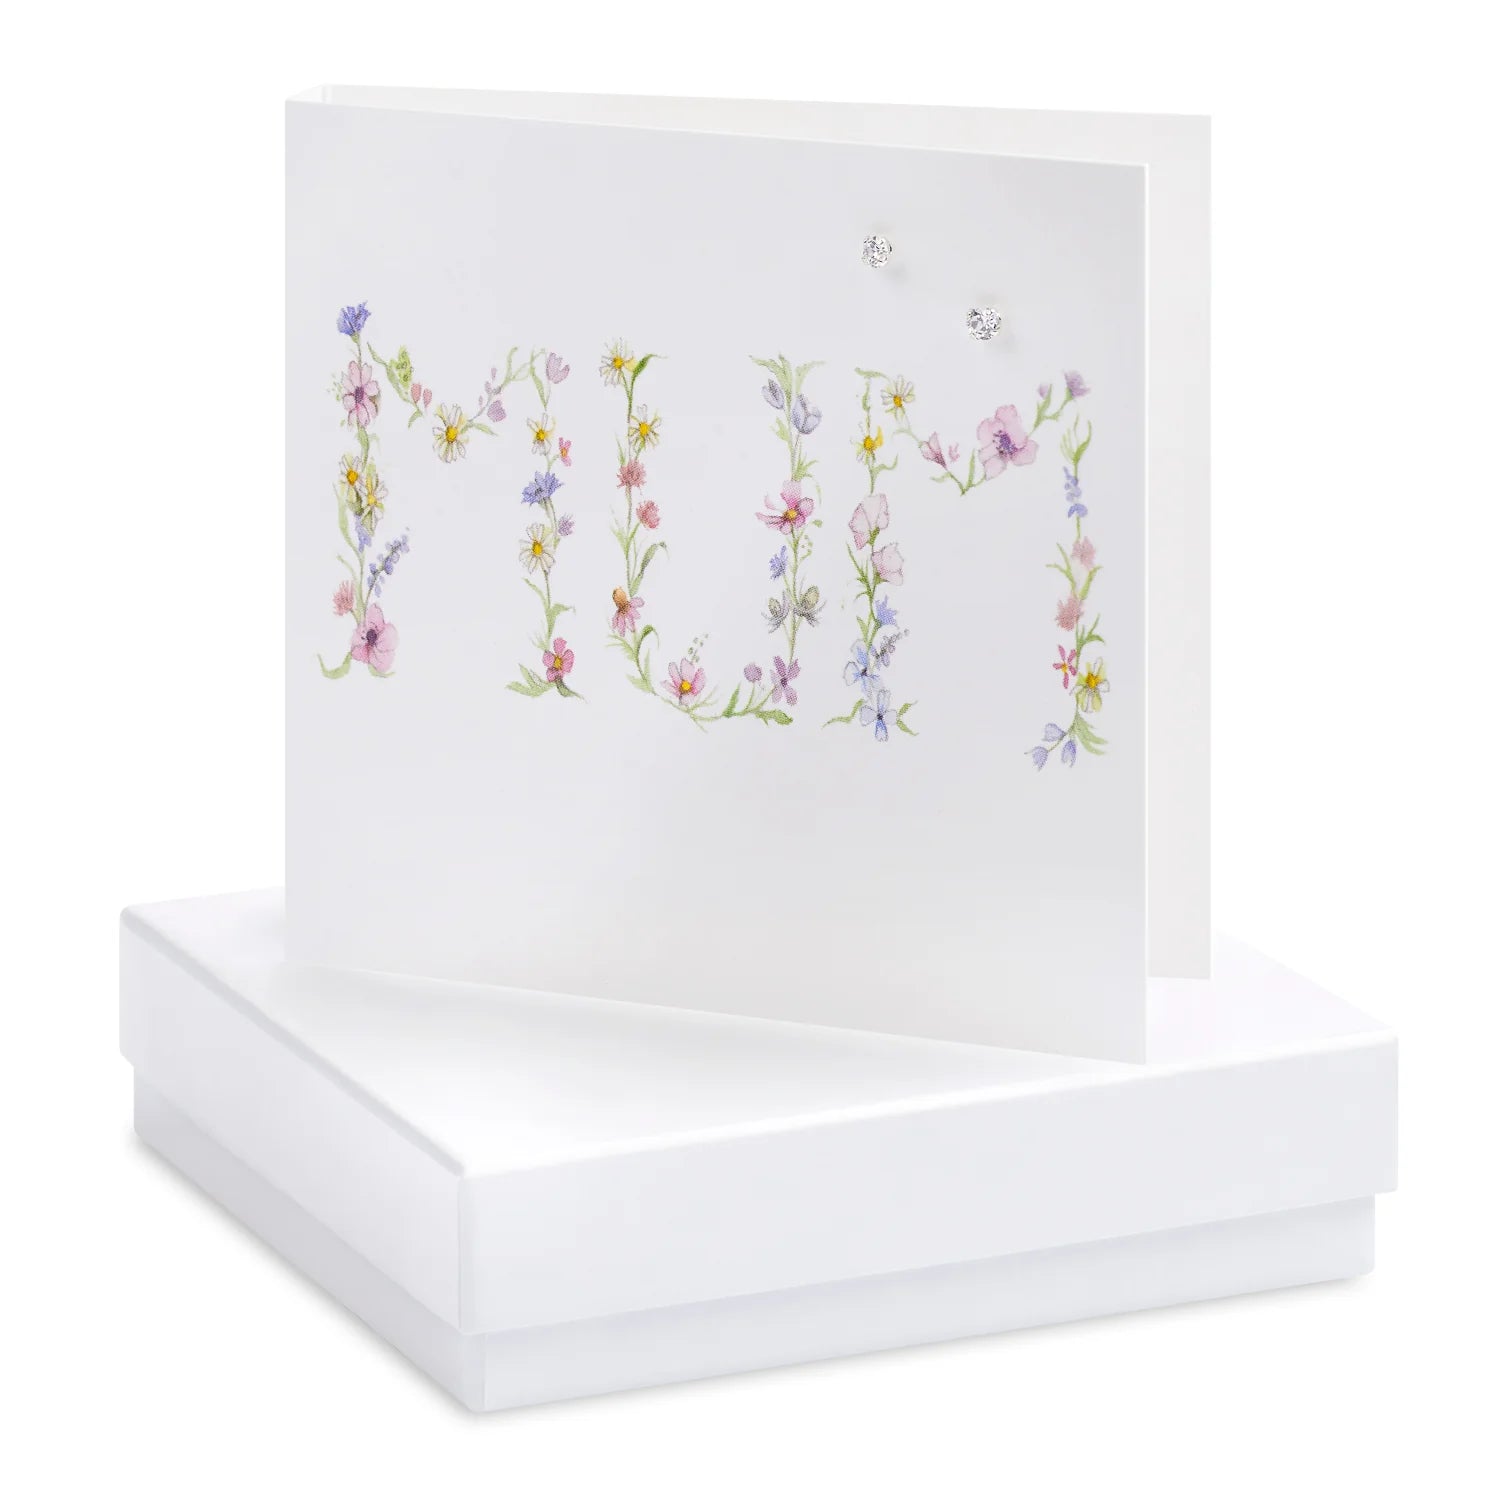 Crumble & Core | Mum Card with Earrings in a White Box by Weirs of Baggot Street